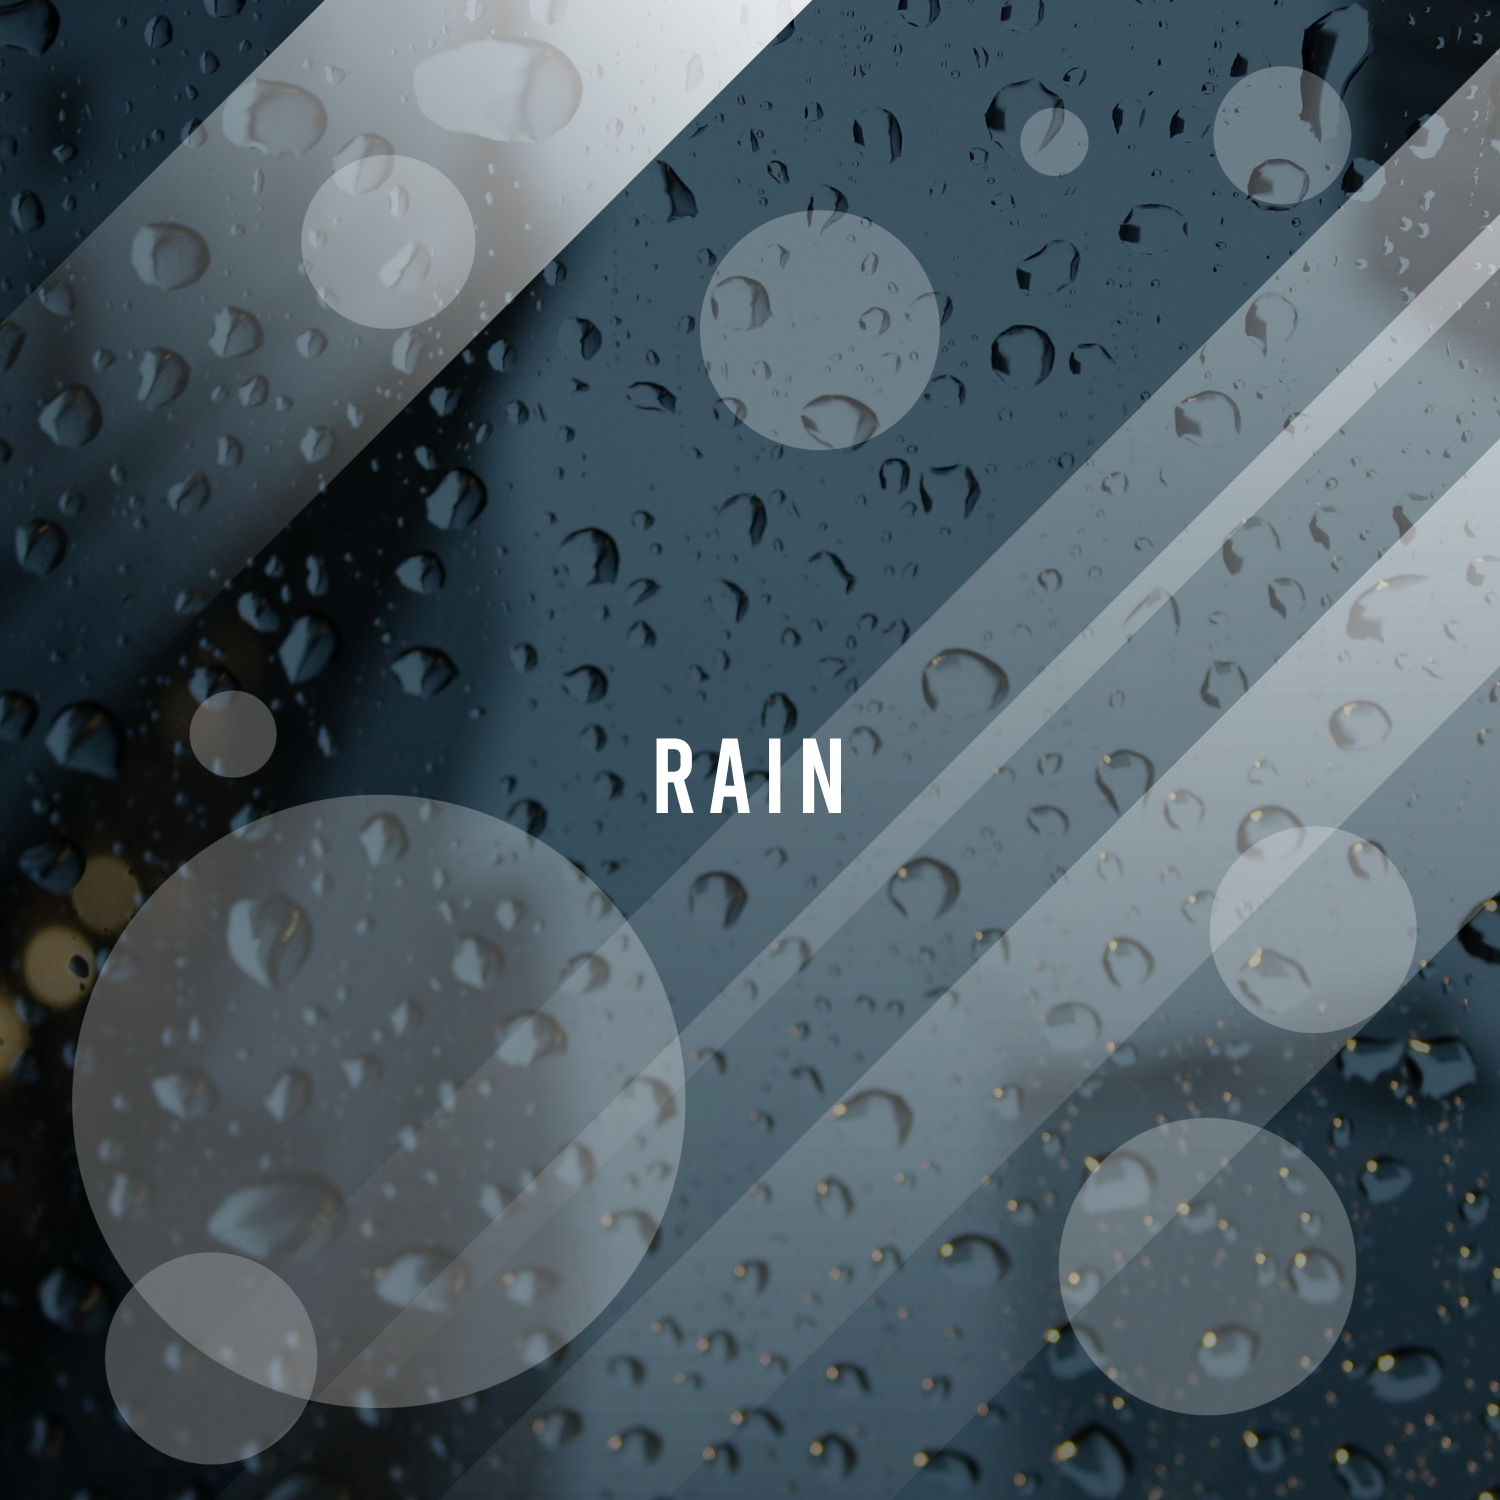 2018 All New White Noise Collection of Rain Sounds